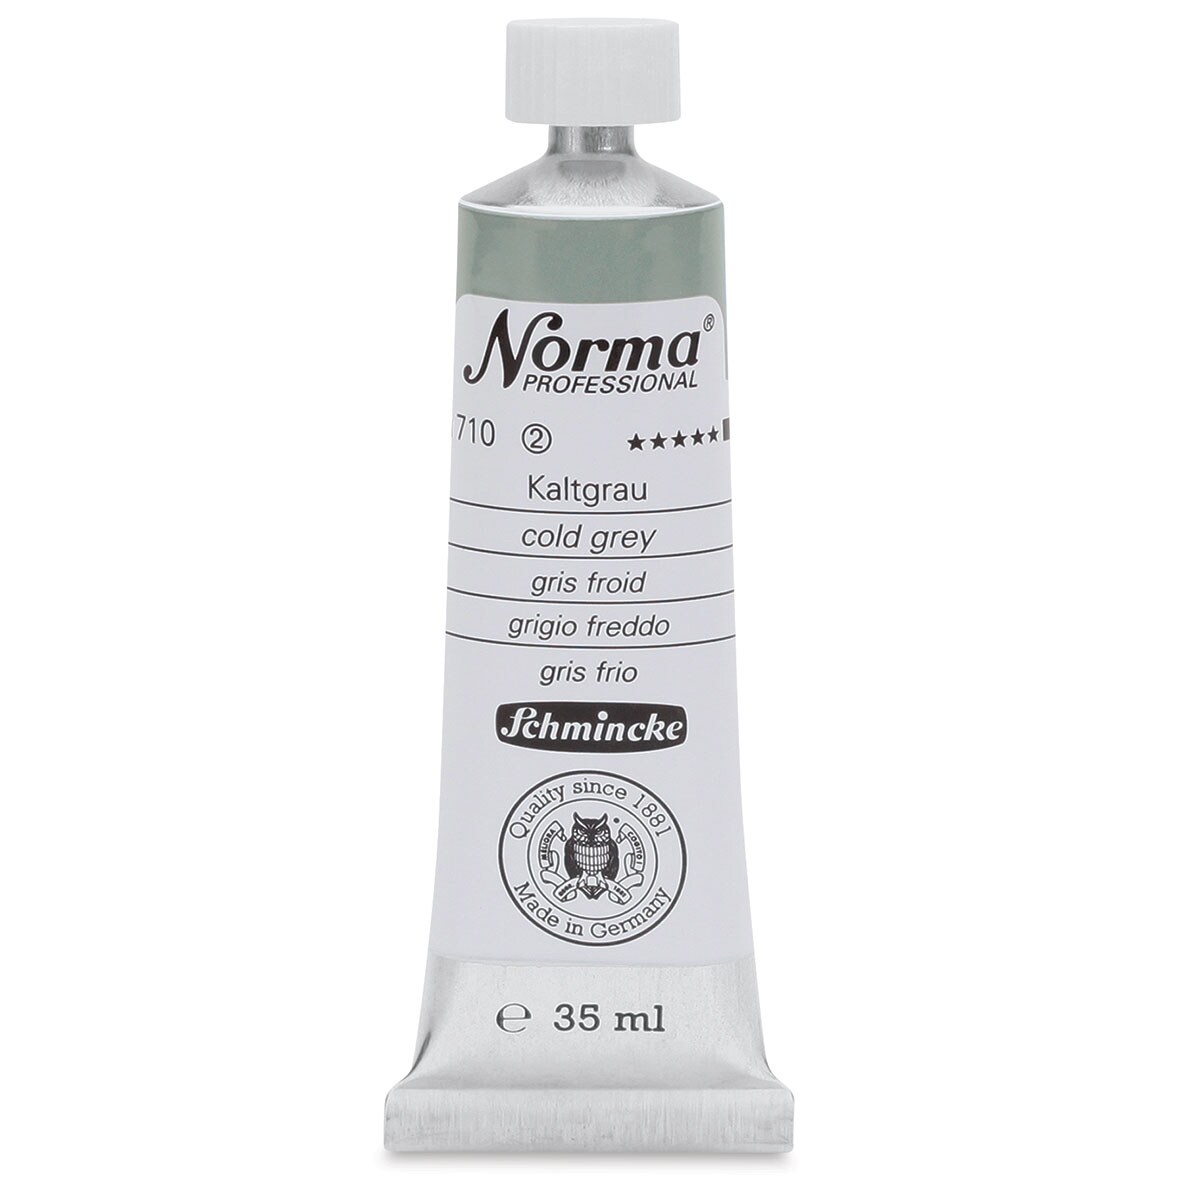 Schmincke Norma Professional Oil Paint - Cold Grey, 35 ml, Tube